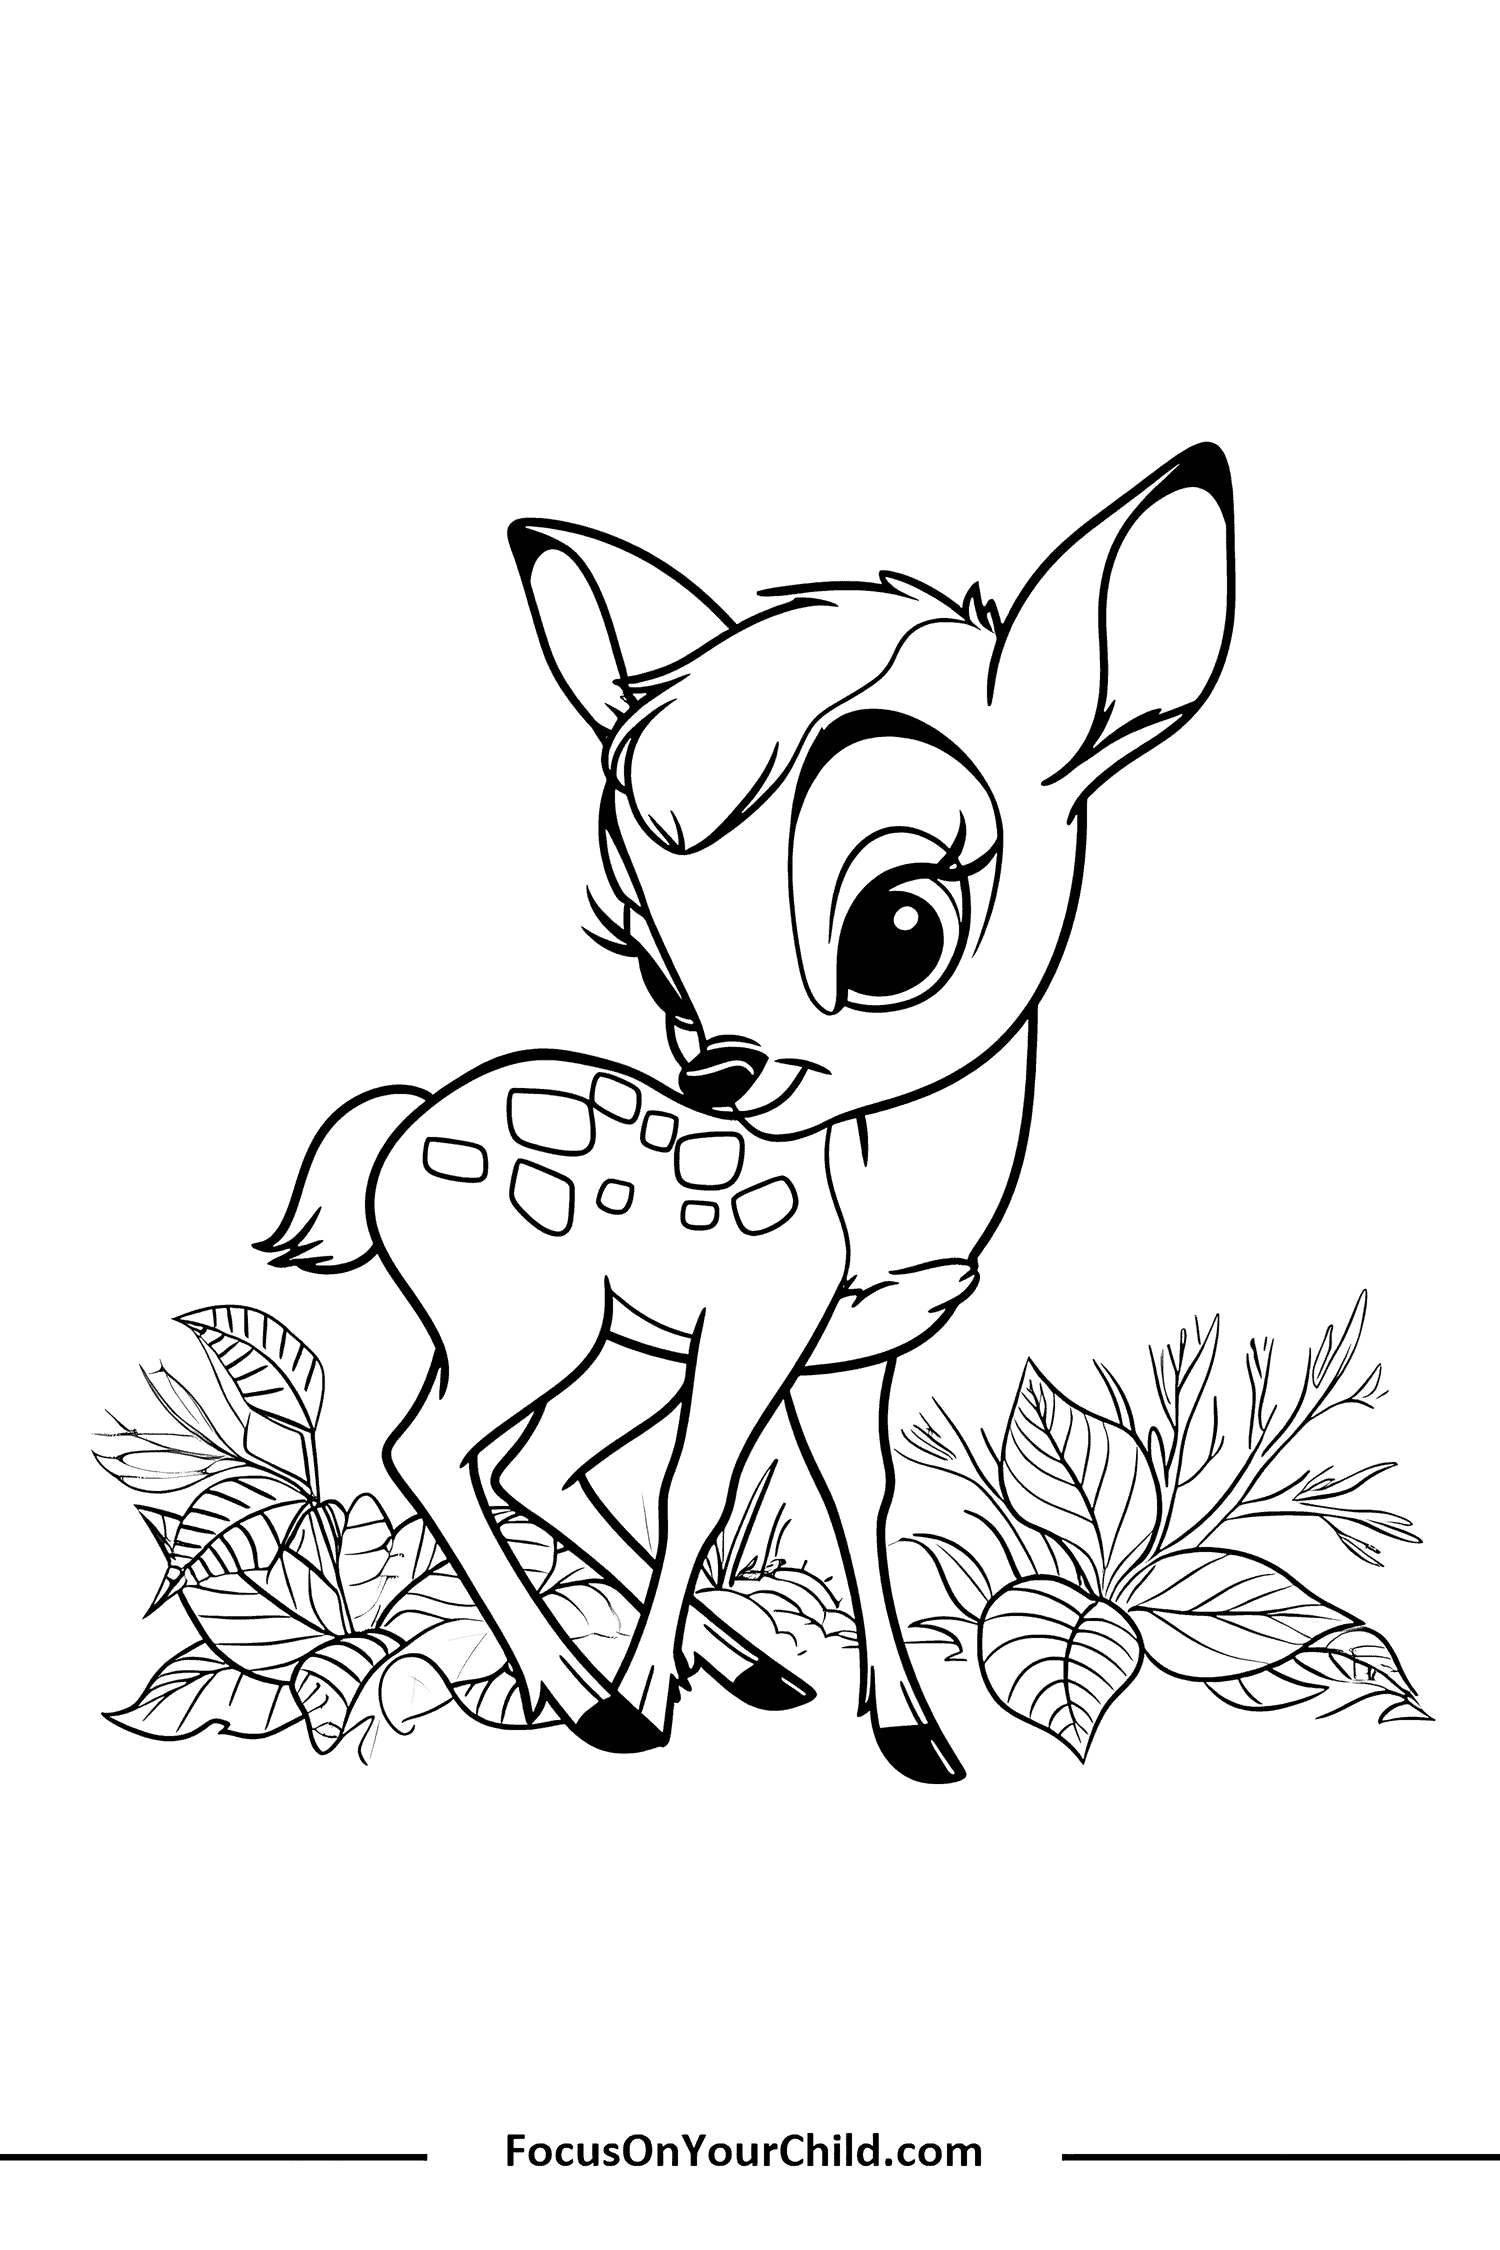 Young deer cartoon drawing in forest setting from childrens website.